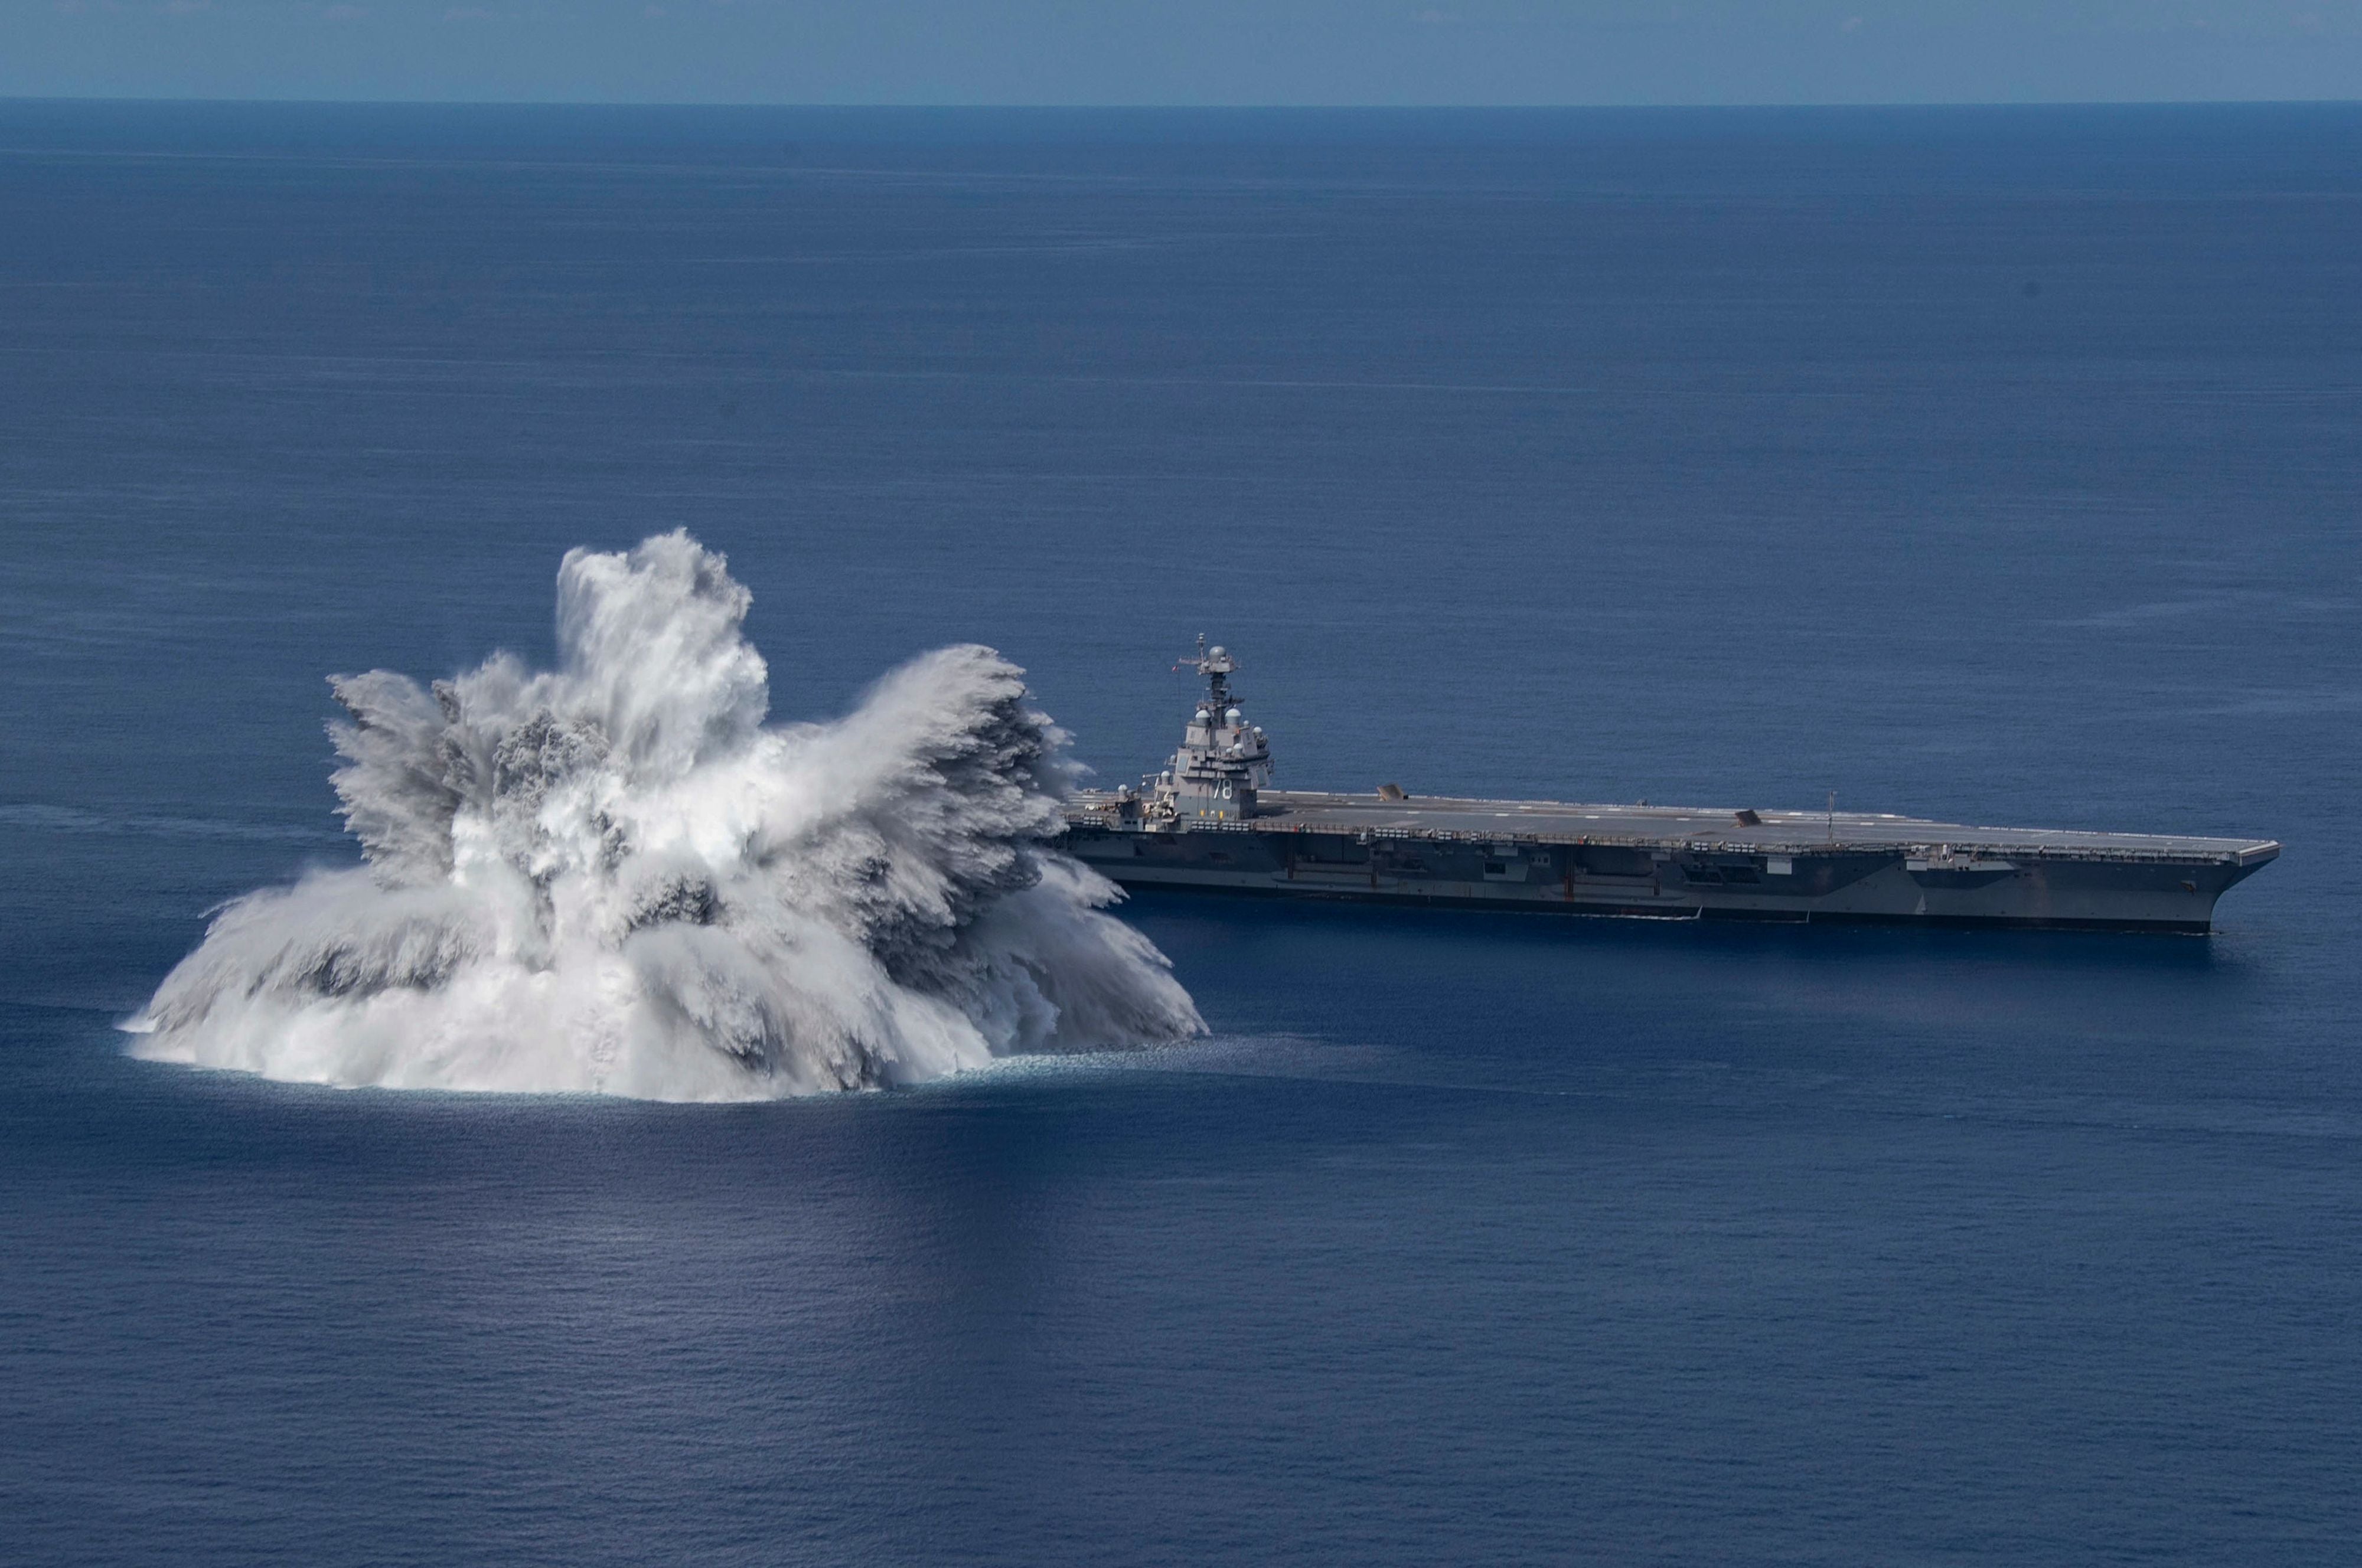 A navy statement Sunday said the 40,000-pound (18,143-kilo) explosion was triggered as part of work to evaluate the aircraft carrier, USS Gerald R. Ford’s battle readiness